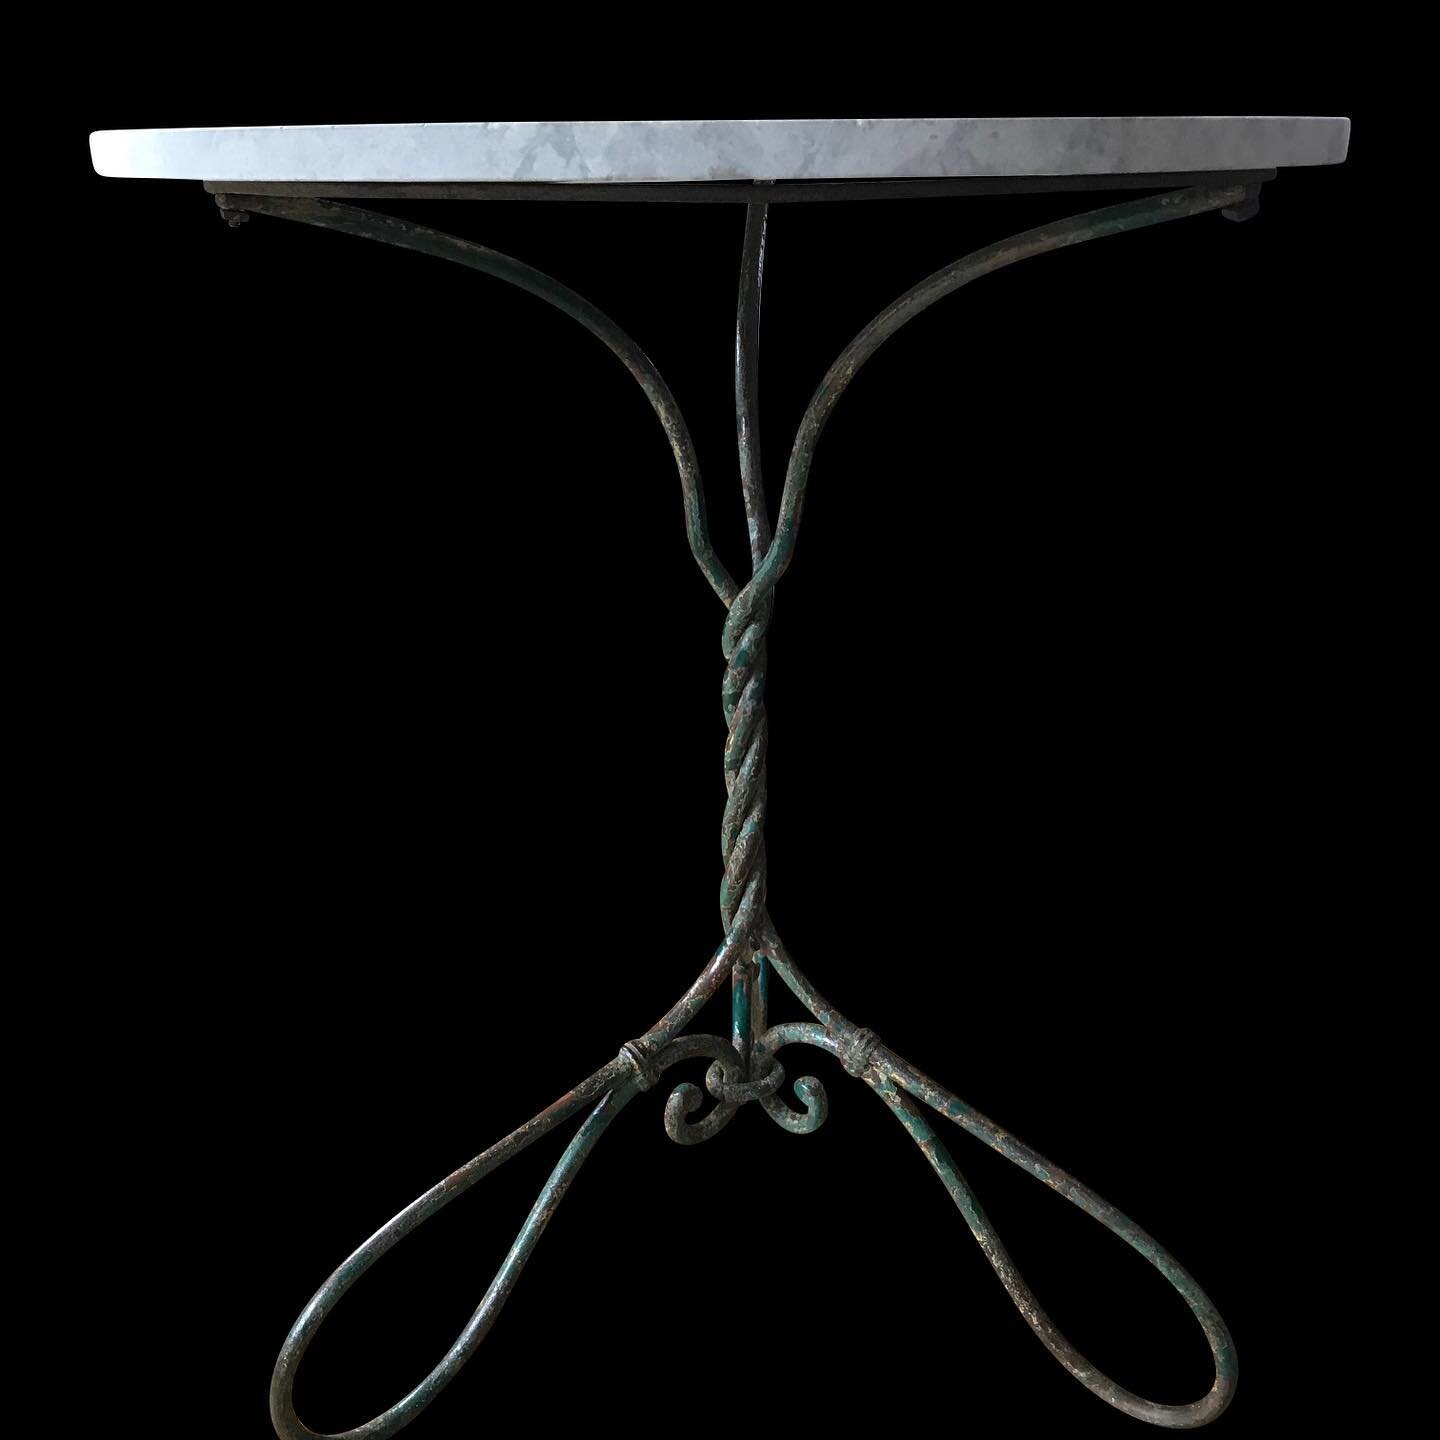 Rare mid 19th Century Iron Vachon cafe / garden table with layers of old paint
﻿#antiques #interiordesign #interiors #interiordecor #antiquedealer #london #anitquegardenfurniture #architecturalantiques #architecturalsalvage #paris #frenchantiques #an